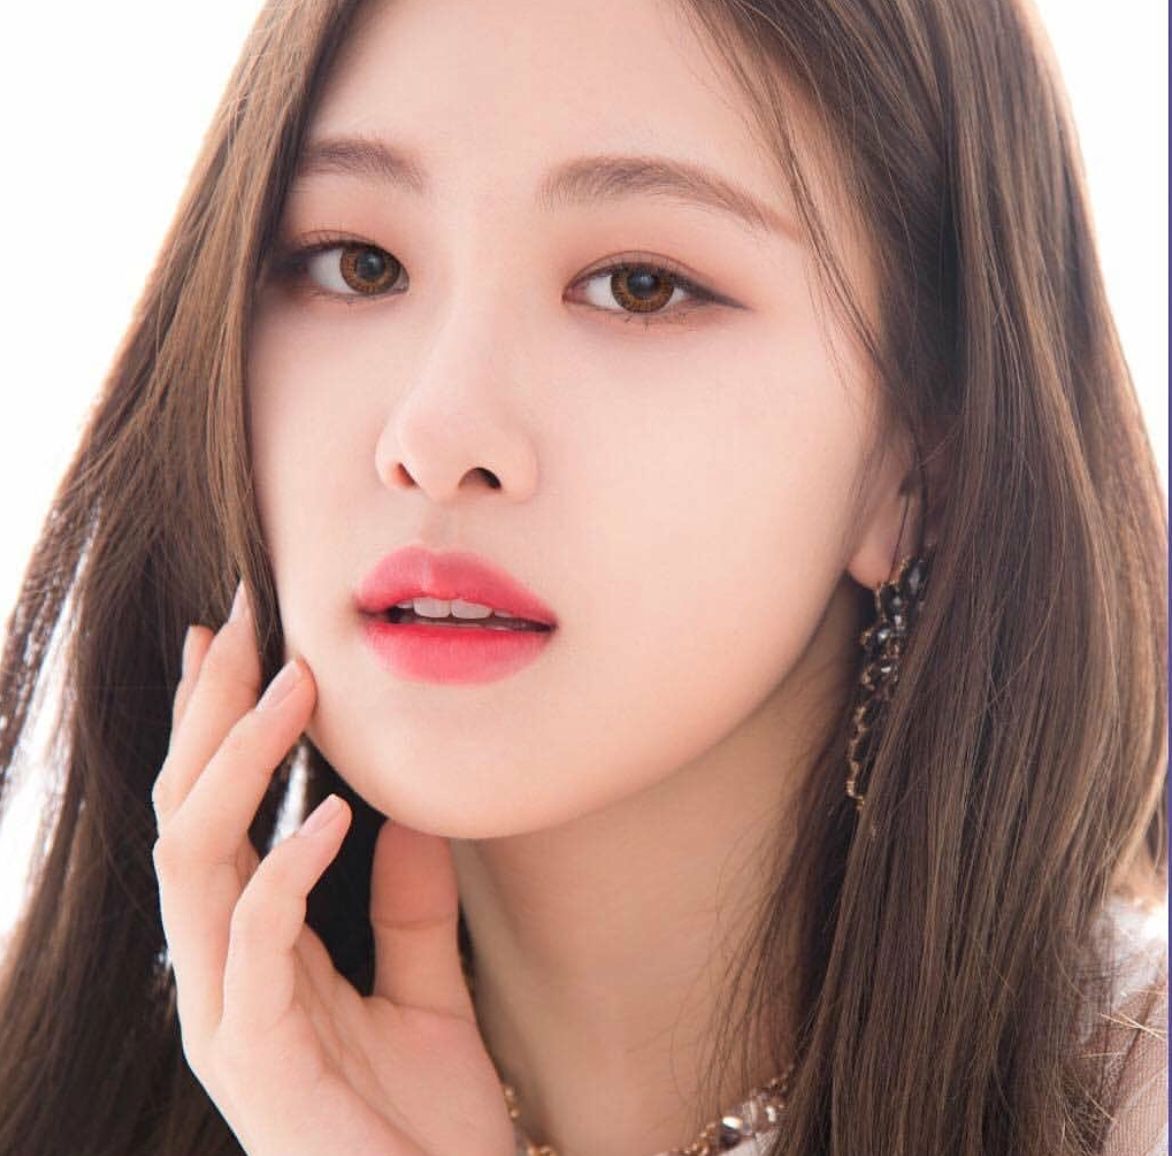 rose-blackpink-explains-how-to-have-flawless-white-skin-3